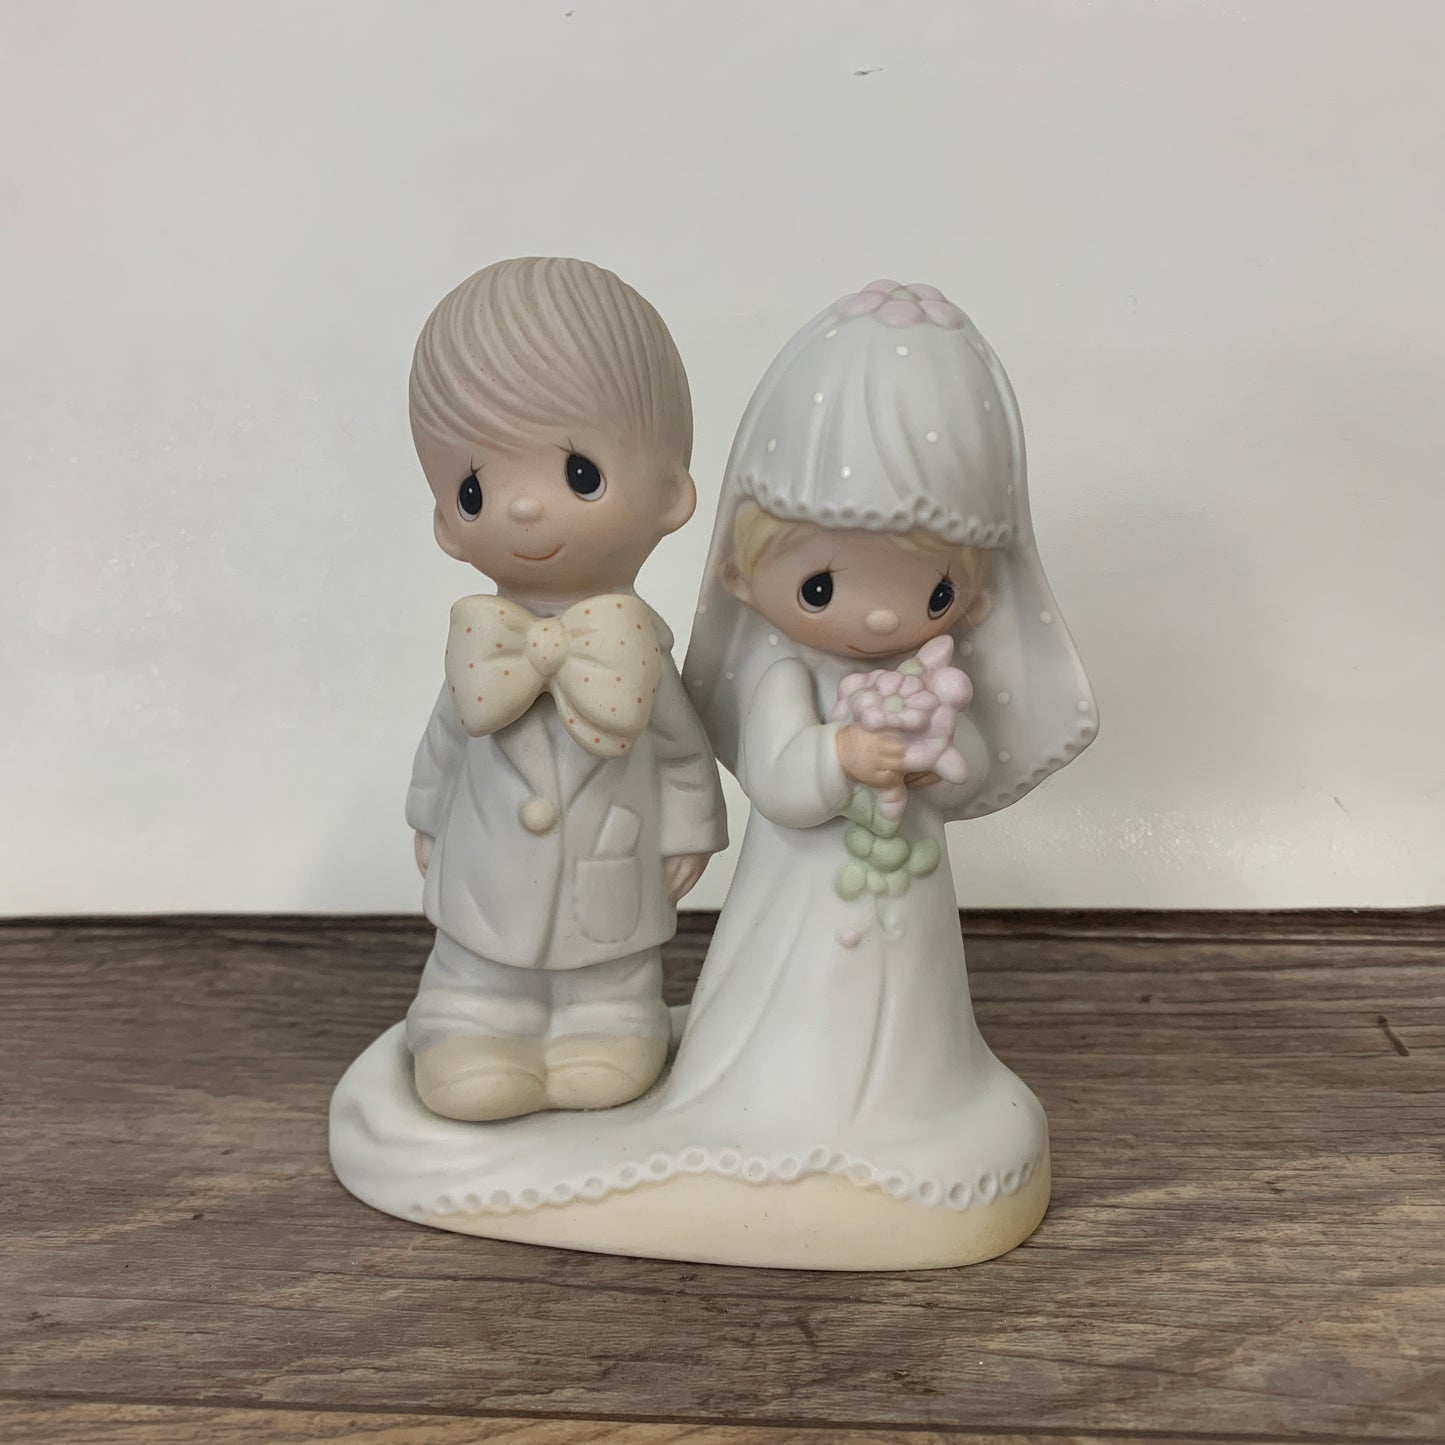 Precious Moments "The Lord Bless you and Keep You" 1979 Figurine Vintage Wedding Gift